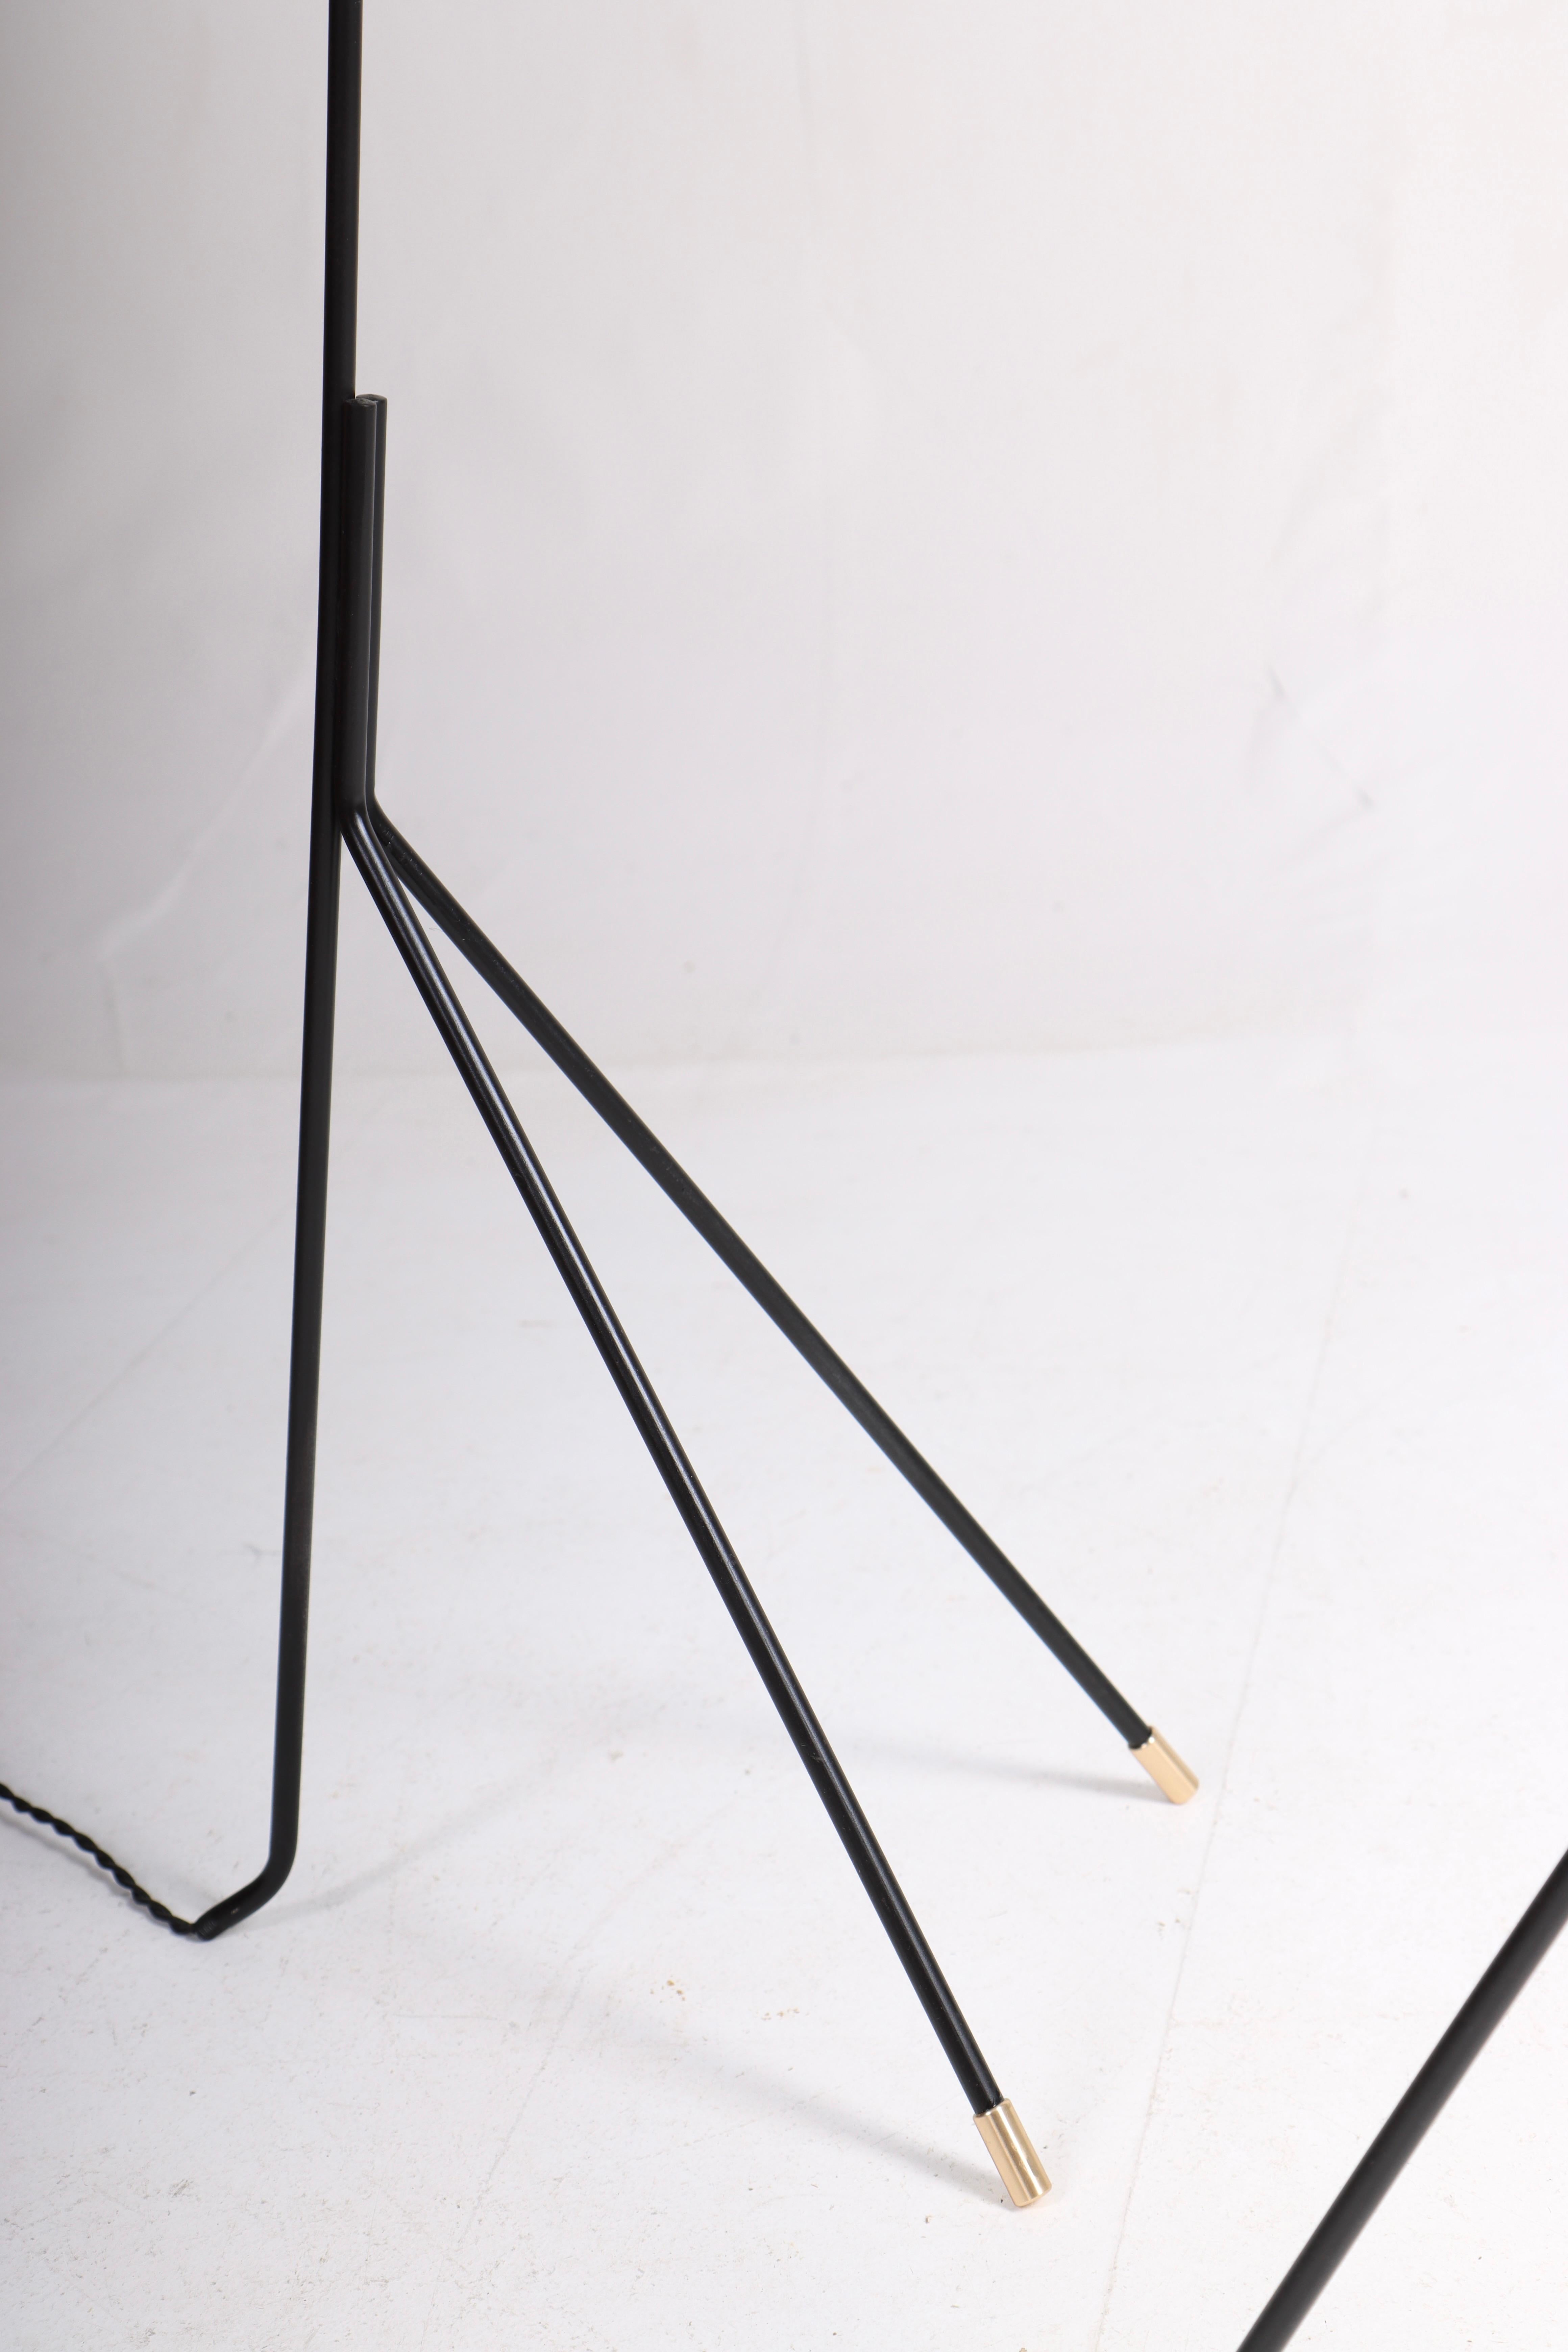 Pair of Midcentury Floor Lamps by Holm Sørensen, Made in Denmark, 1950s For Sale 1